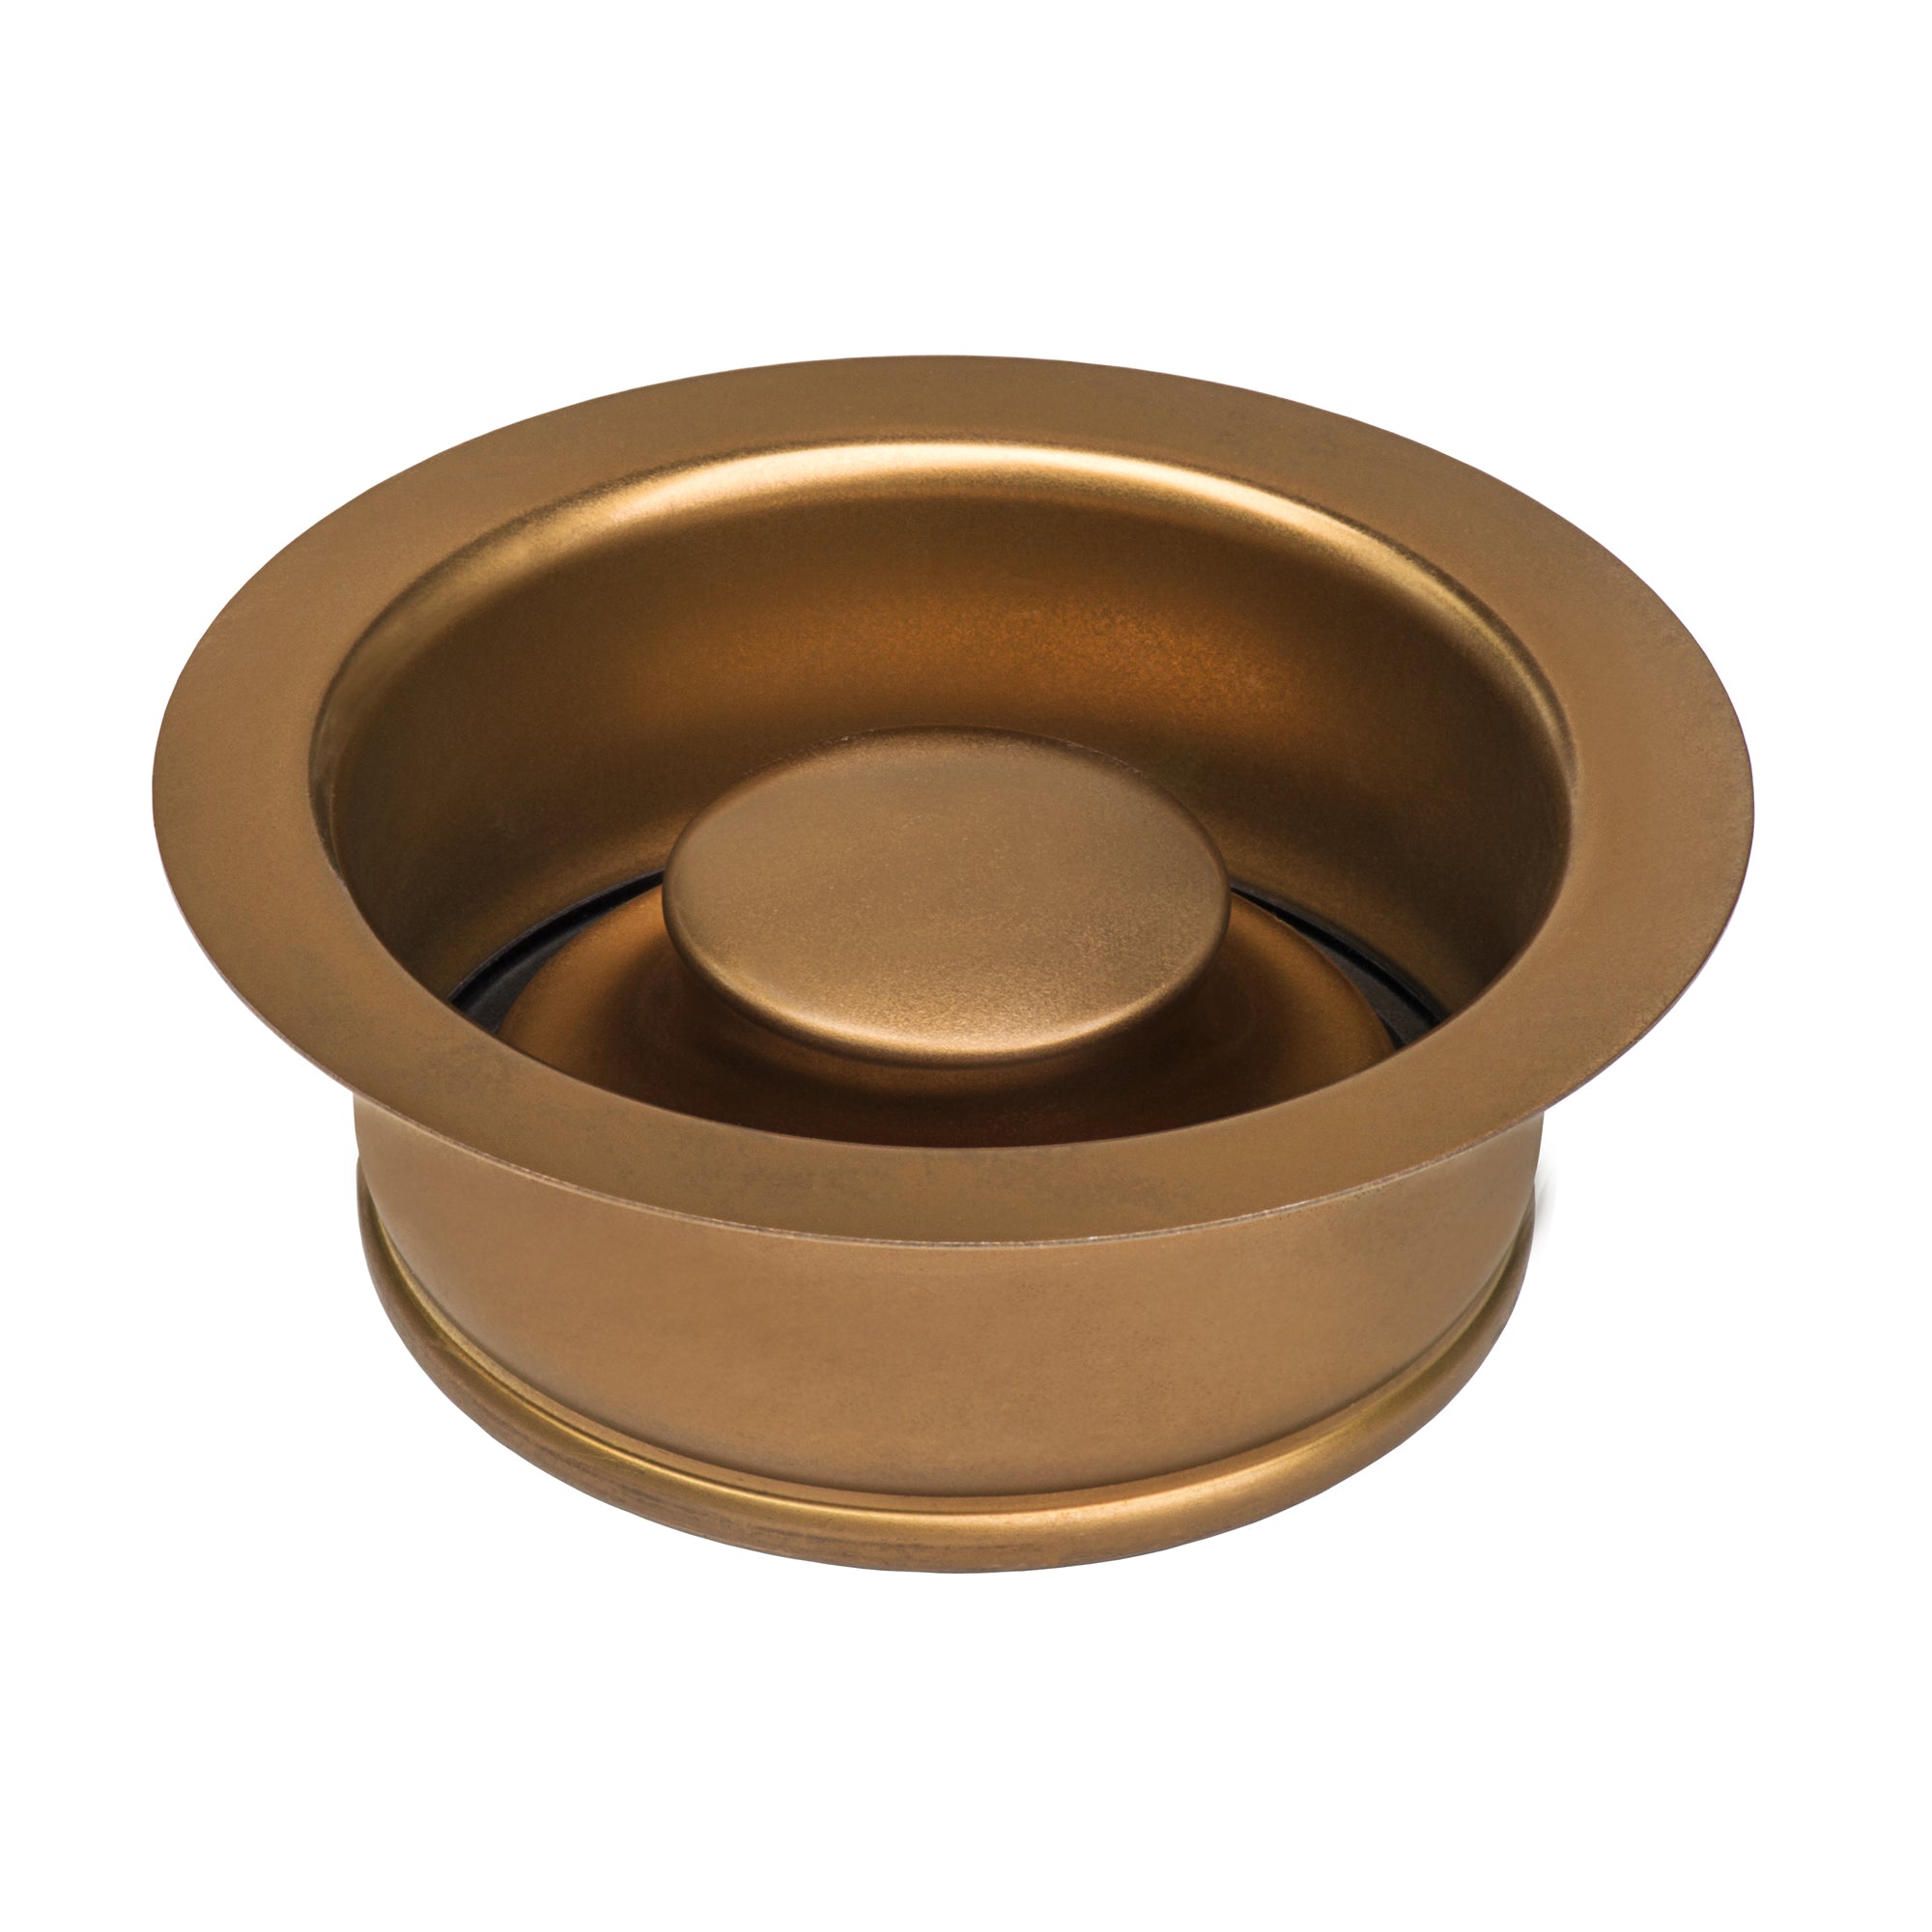 Ruvati Garbage Disposal Flange for Kitchen Sinks – Copper Tone Stainless Steel – RVA1041CP